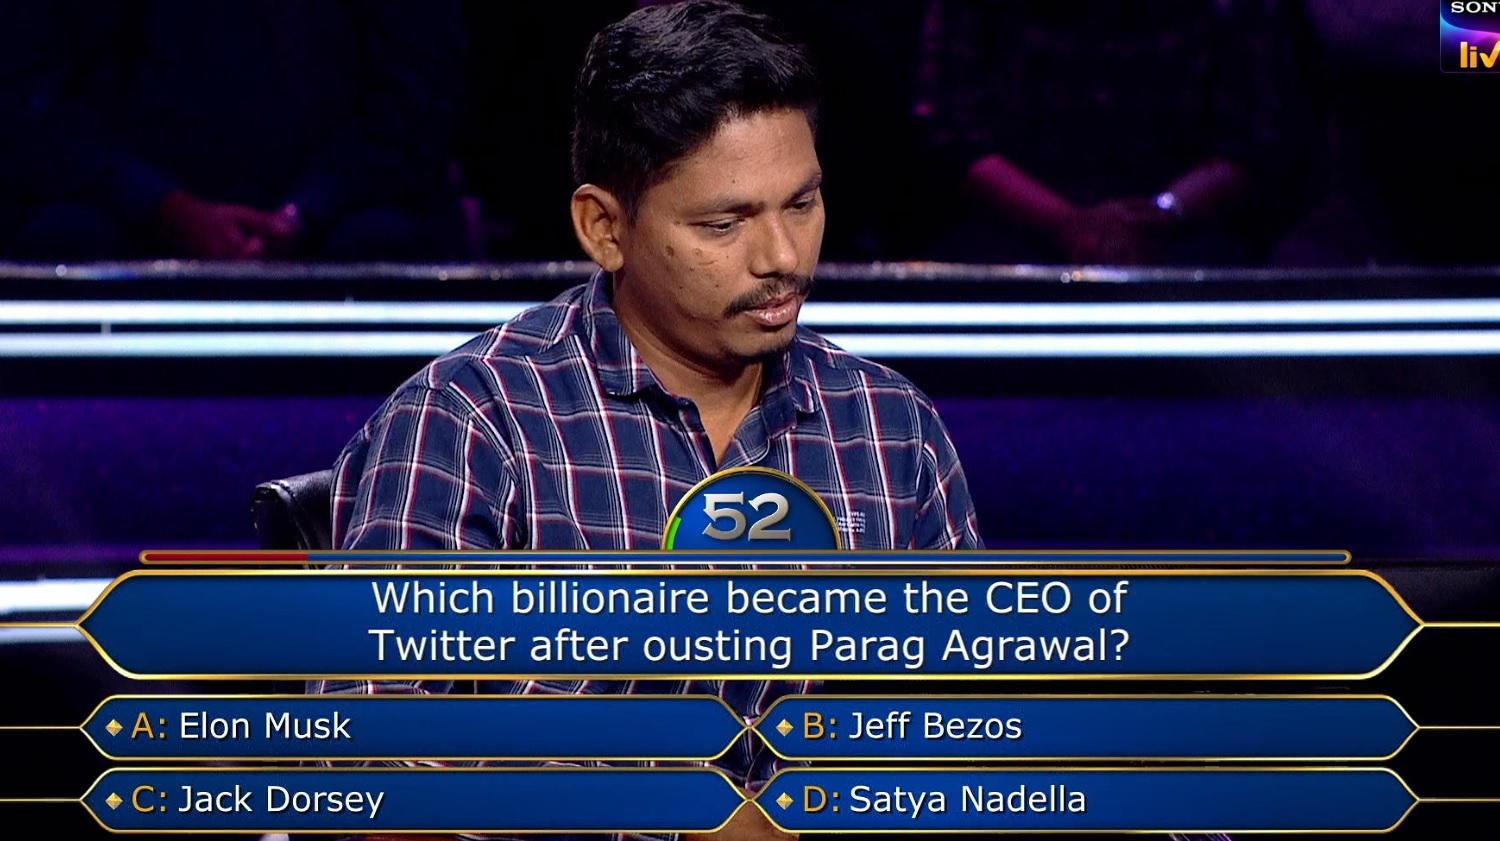 Ques : Which billionaire became the CEO of Twitter after ousting Parag Agrawal?